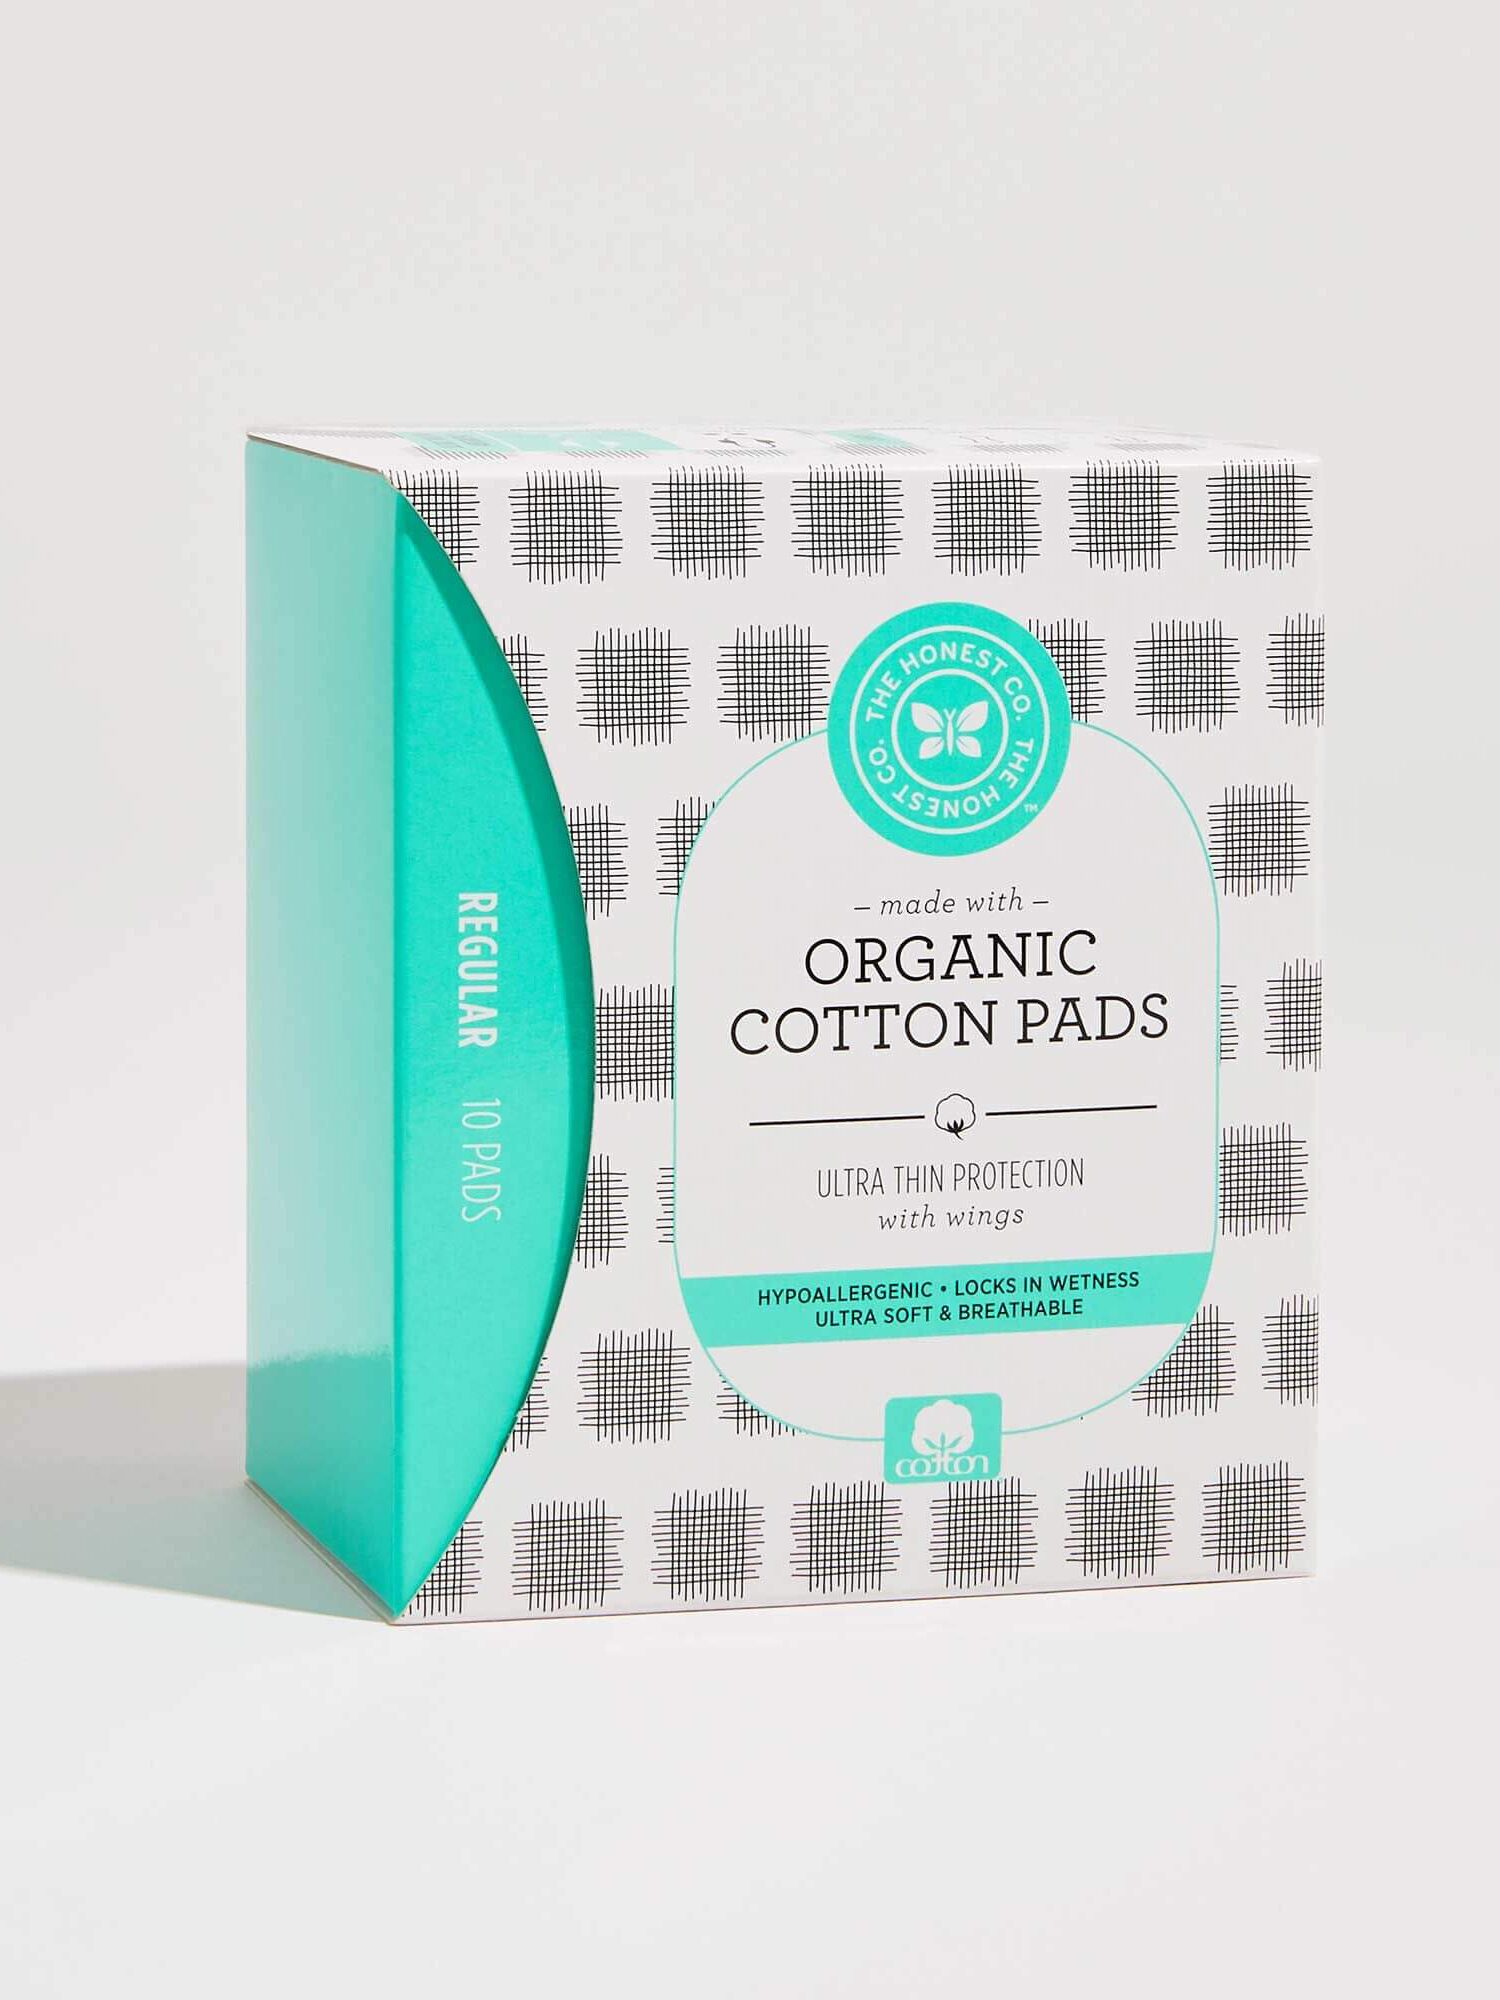 Go With The Flow With These 7 Best Natural & Organic Pads - The Good Trade